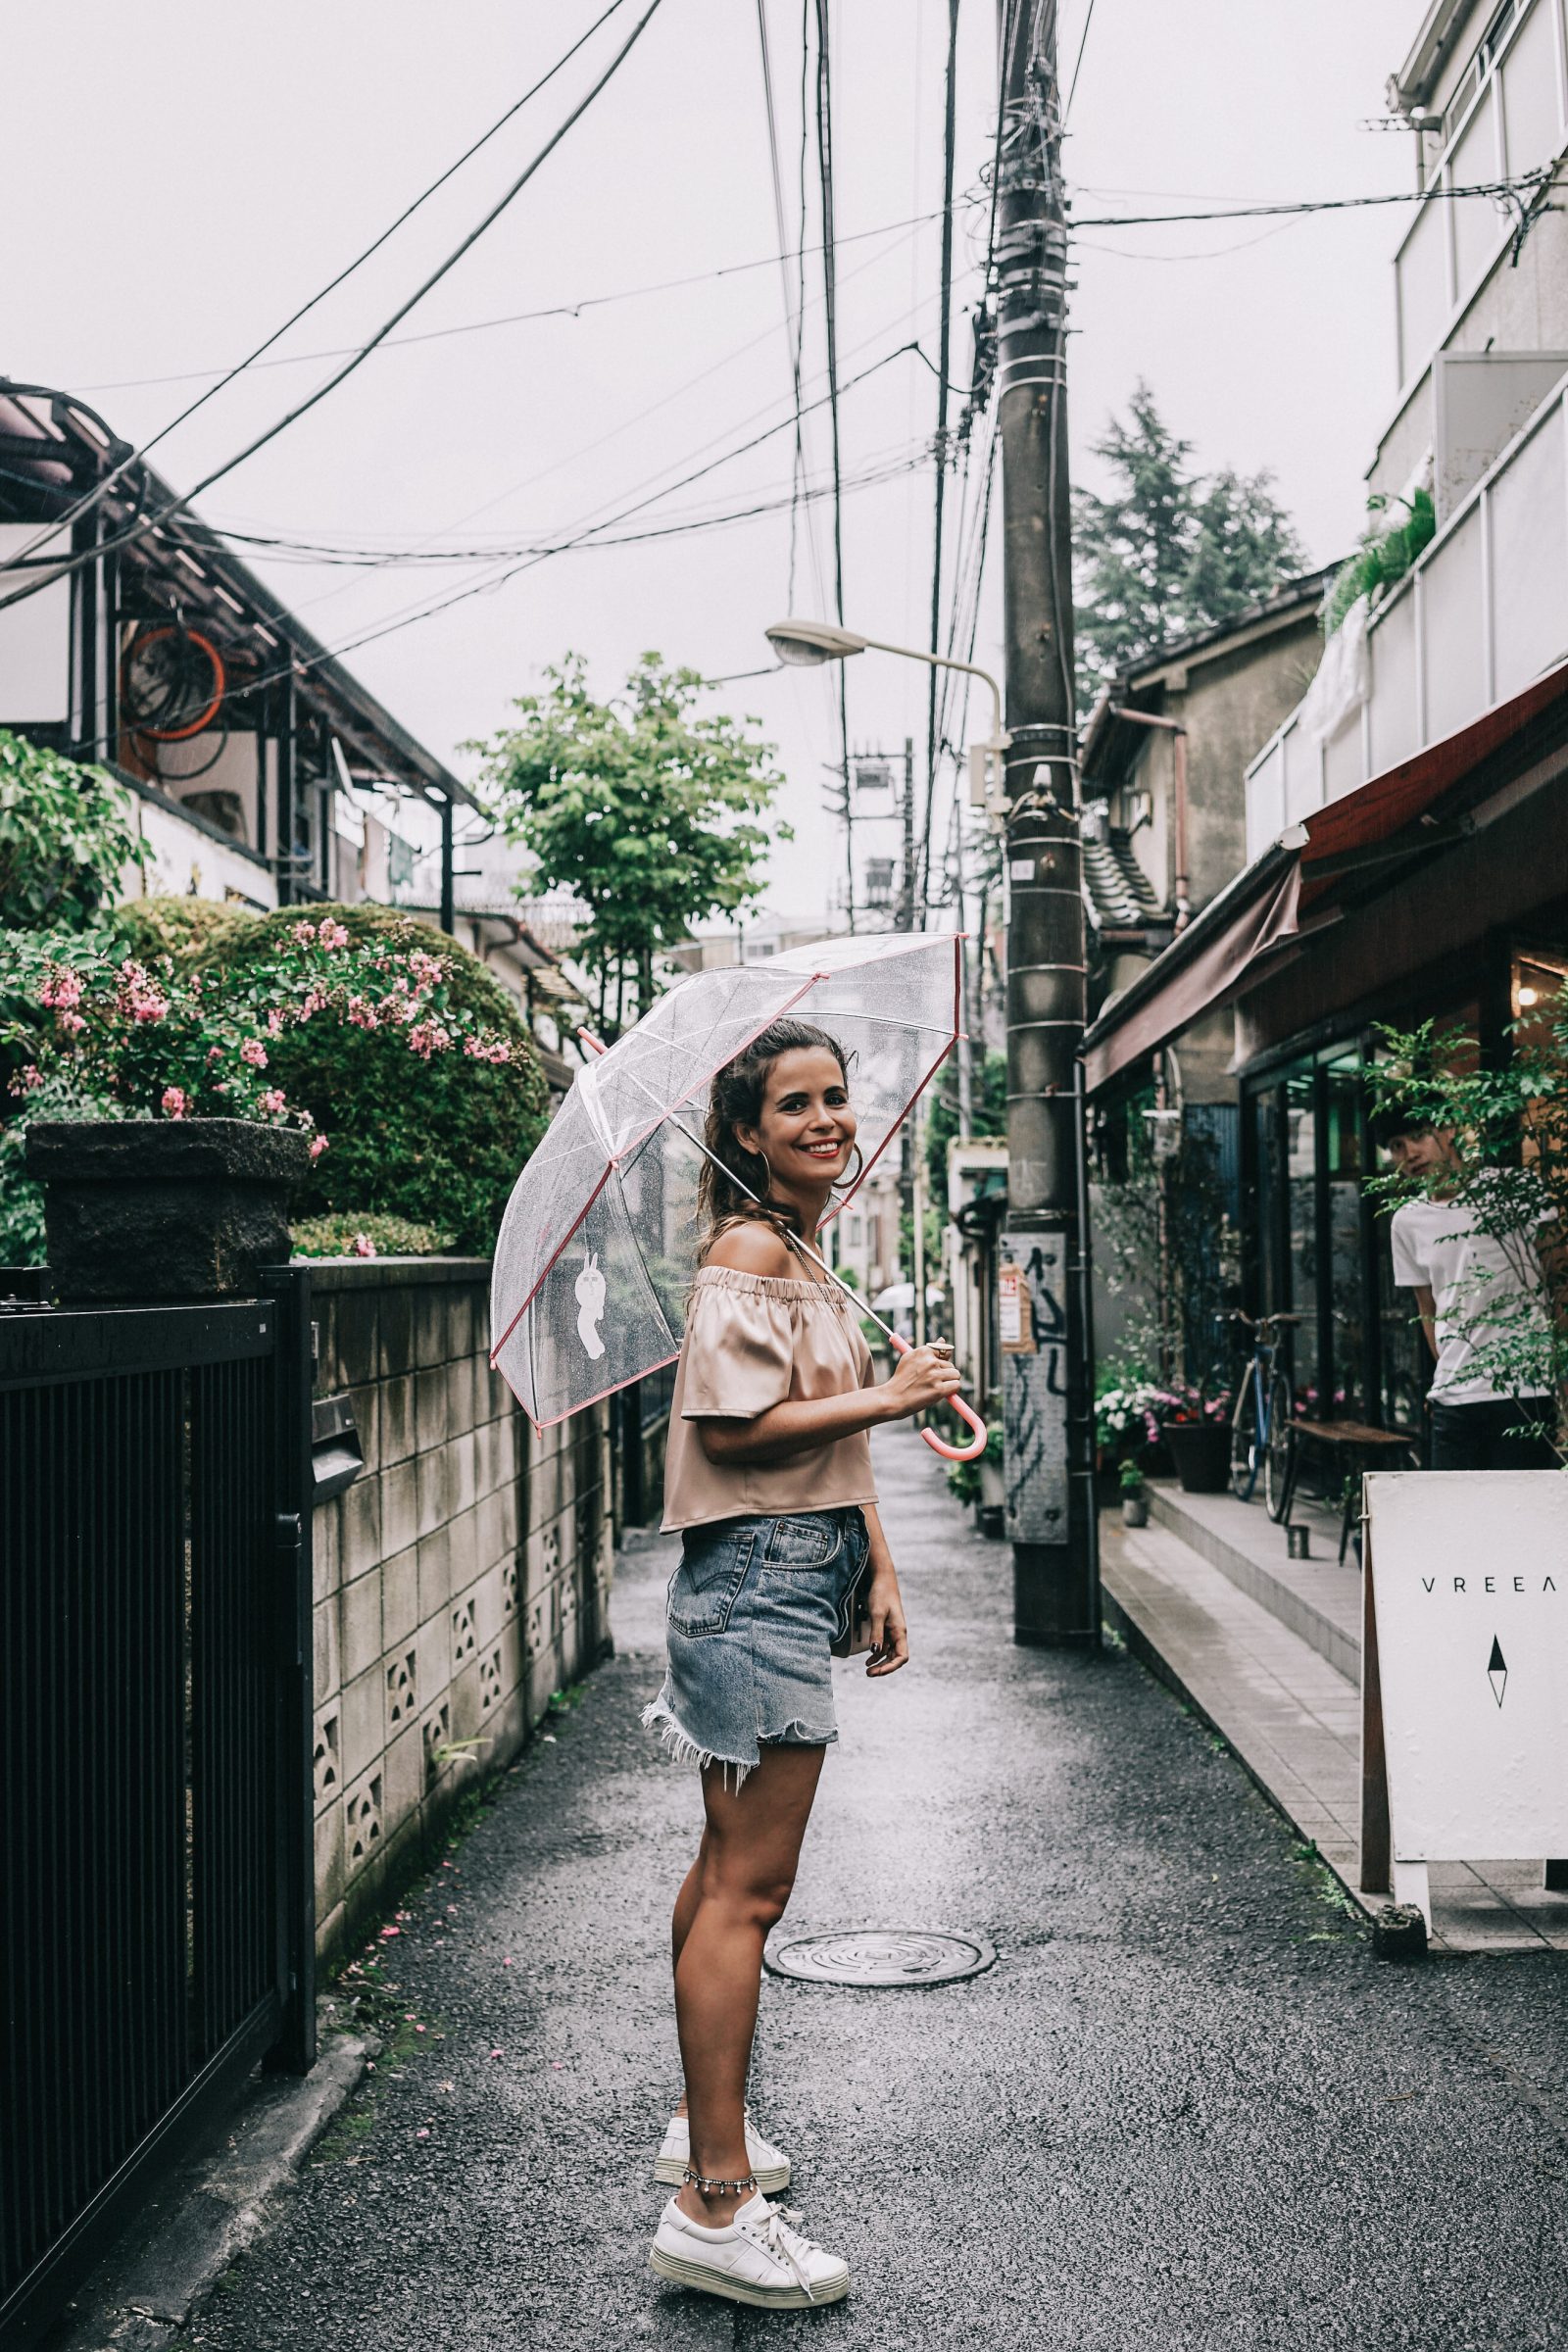 Tokyo_Travel_Guide-Fish_Market-Harajuku-Levis_Denim_Skirt-Off_The_Shoulders_Top-YSL_Sneakers-Outfit-Collage_Vintage-Street_Style-141